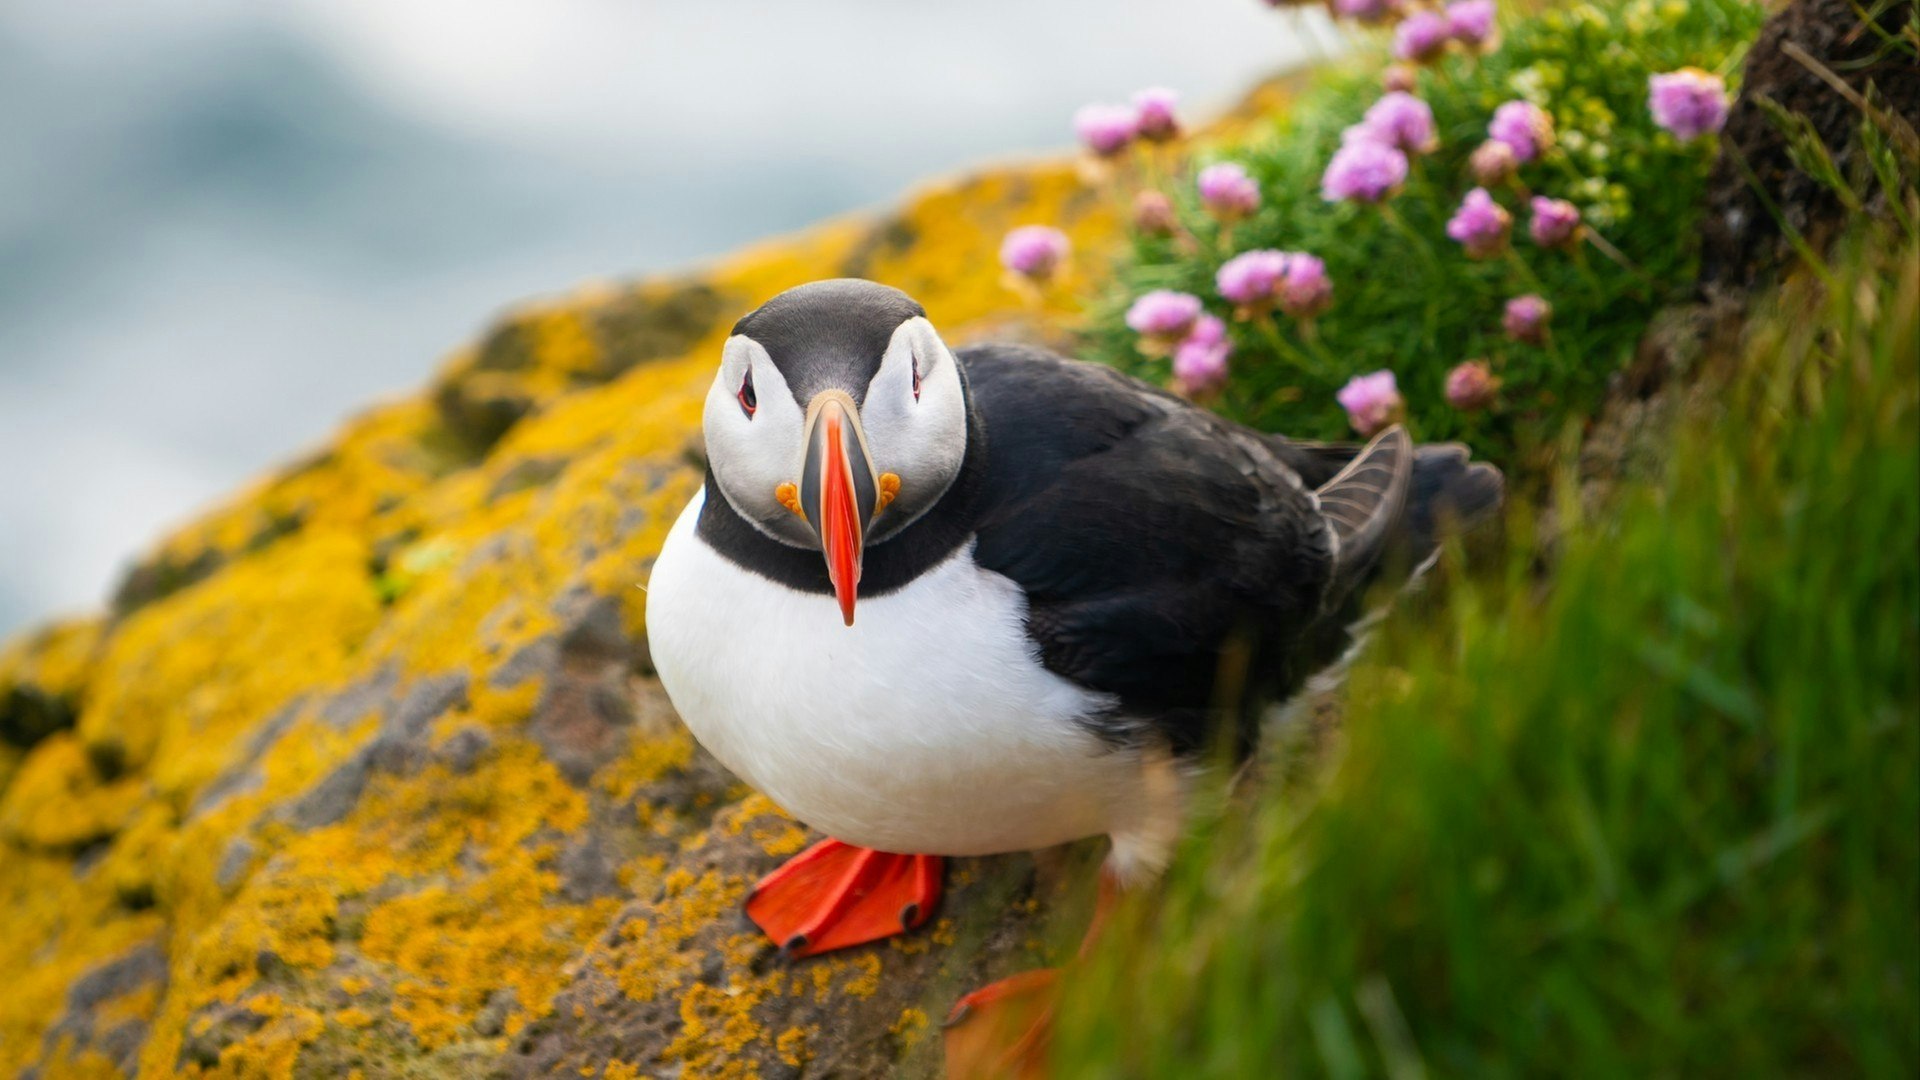 Atlantic puffin also know as common puffin is a species of seabird in the auk family